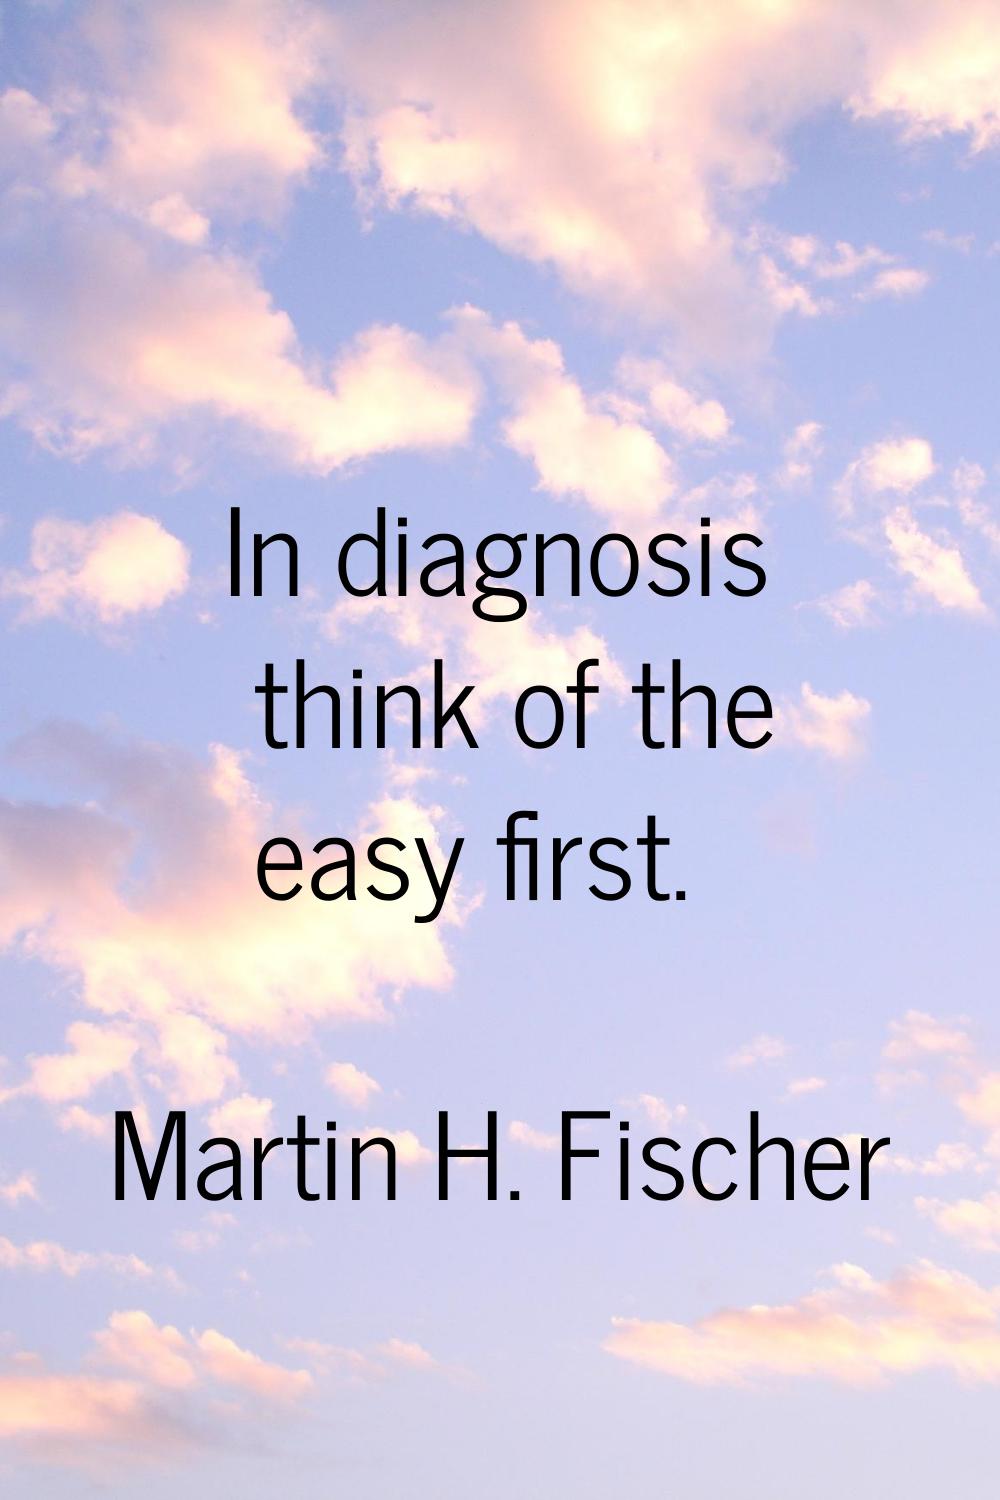 In diagnosis think of the easy first.